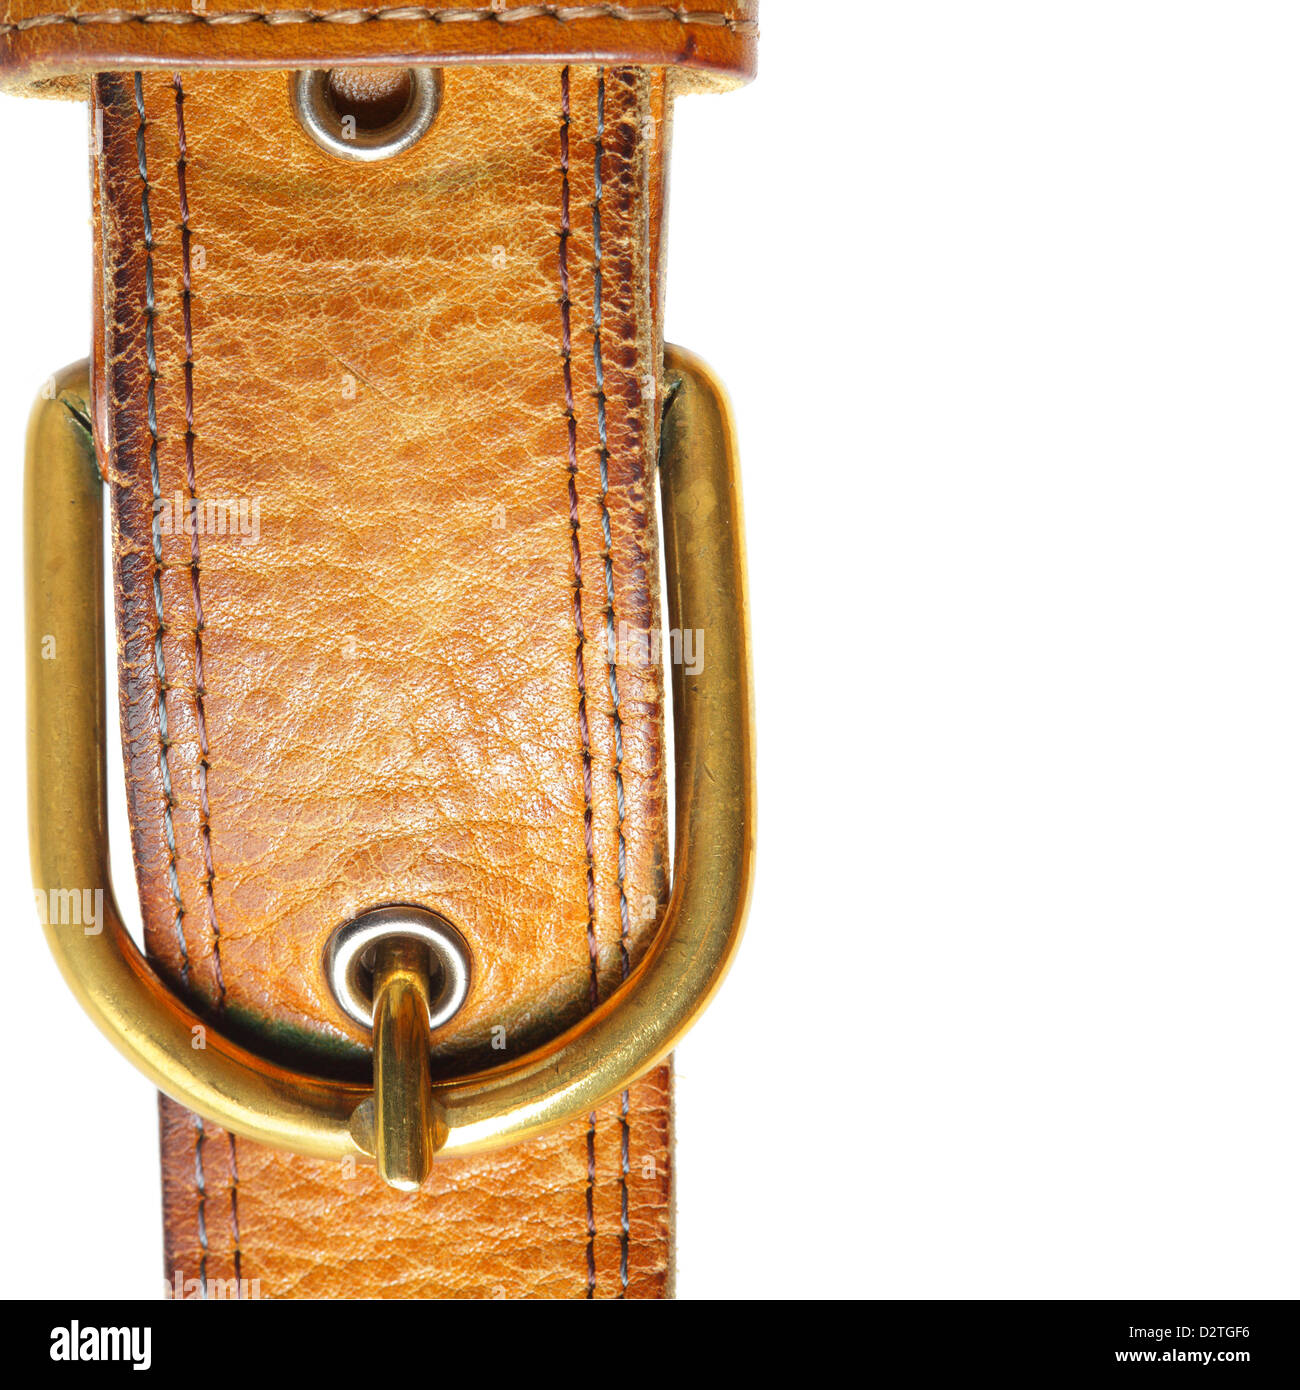 Leather strap close-up isolated over white background Stock Photo